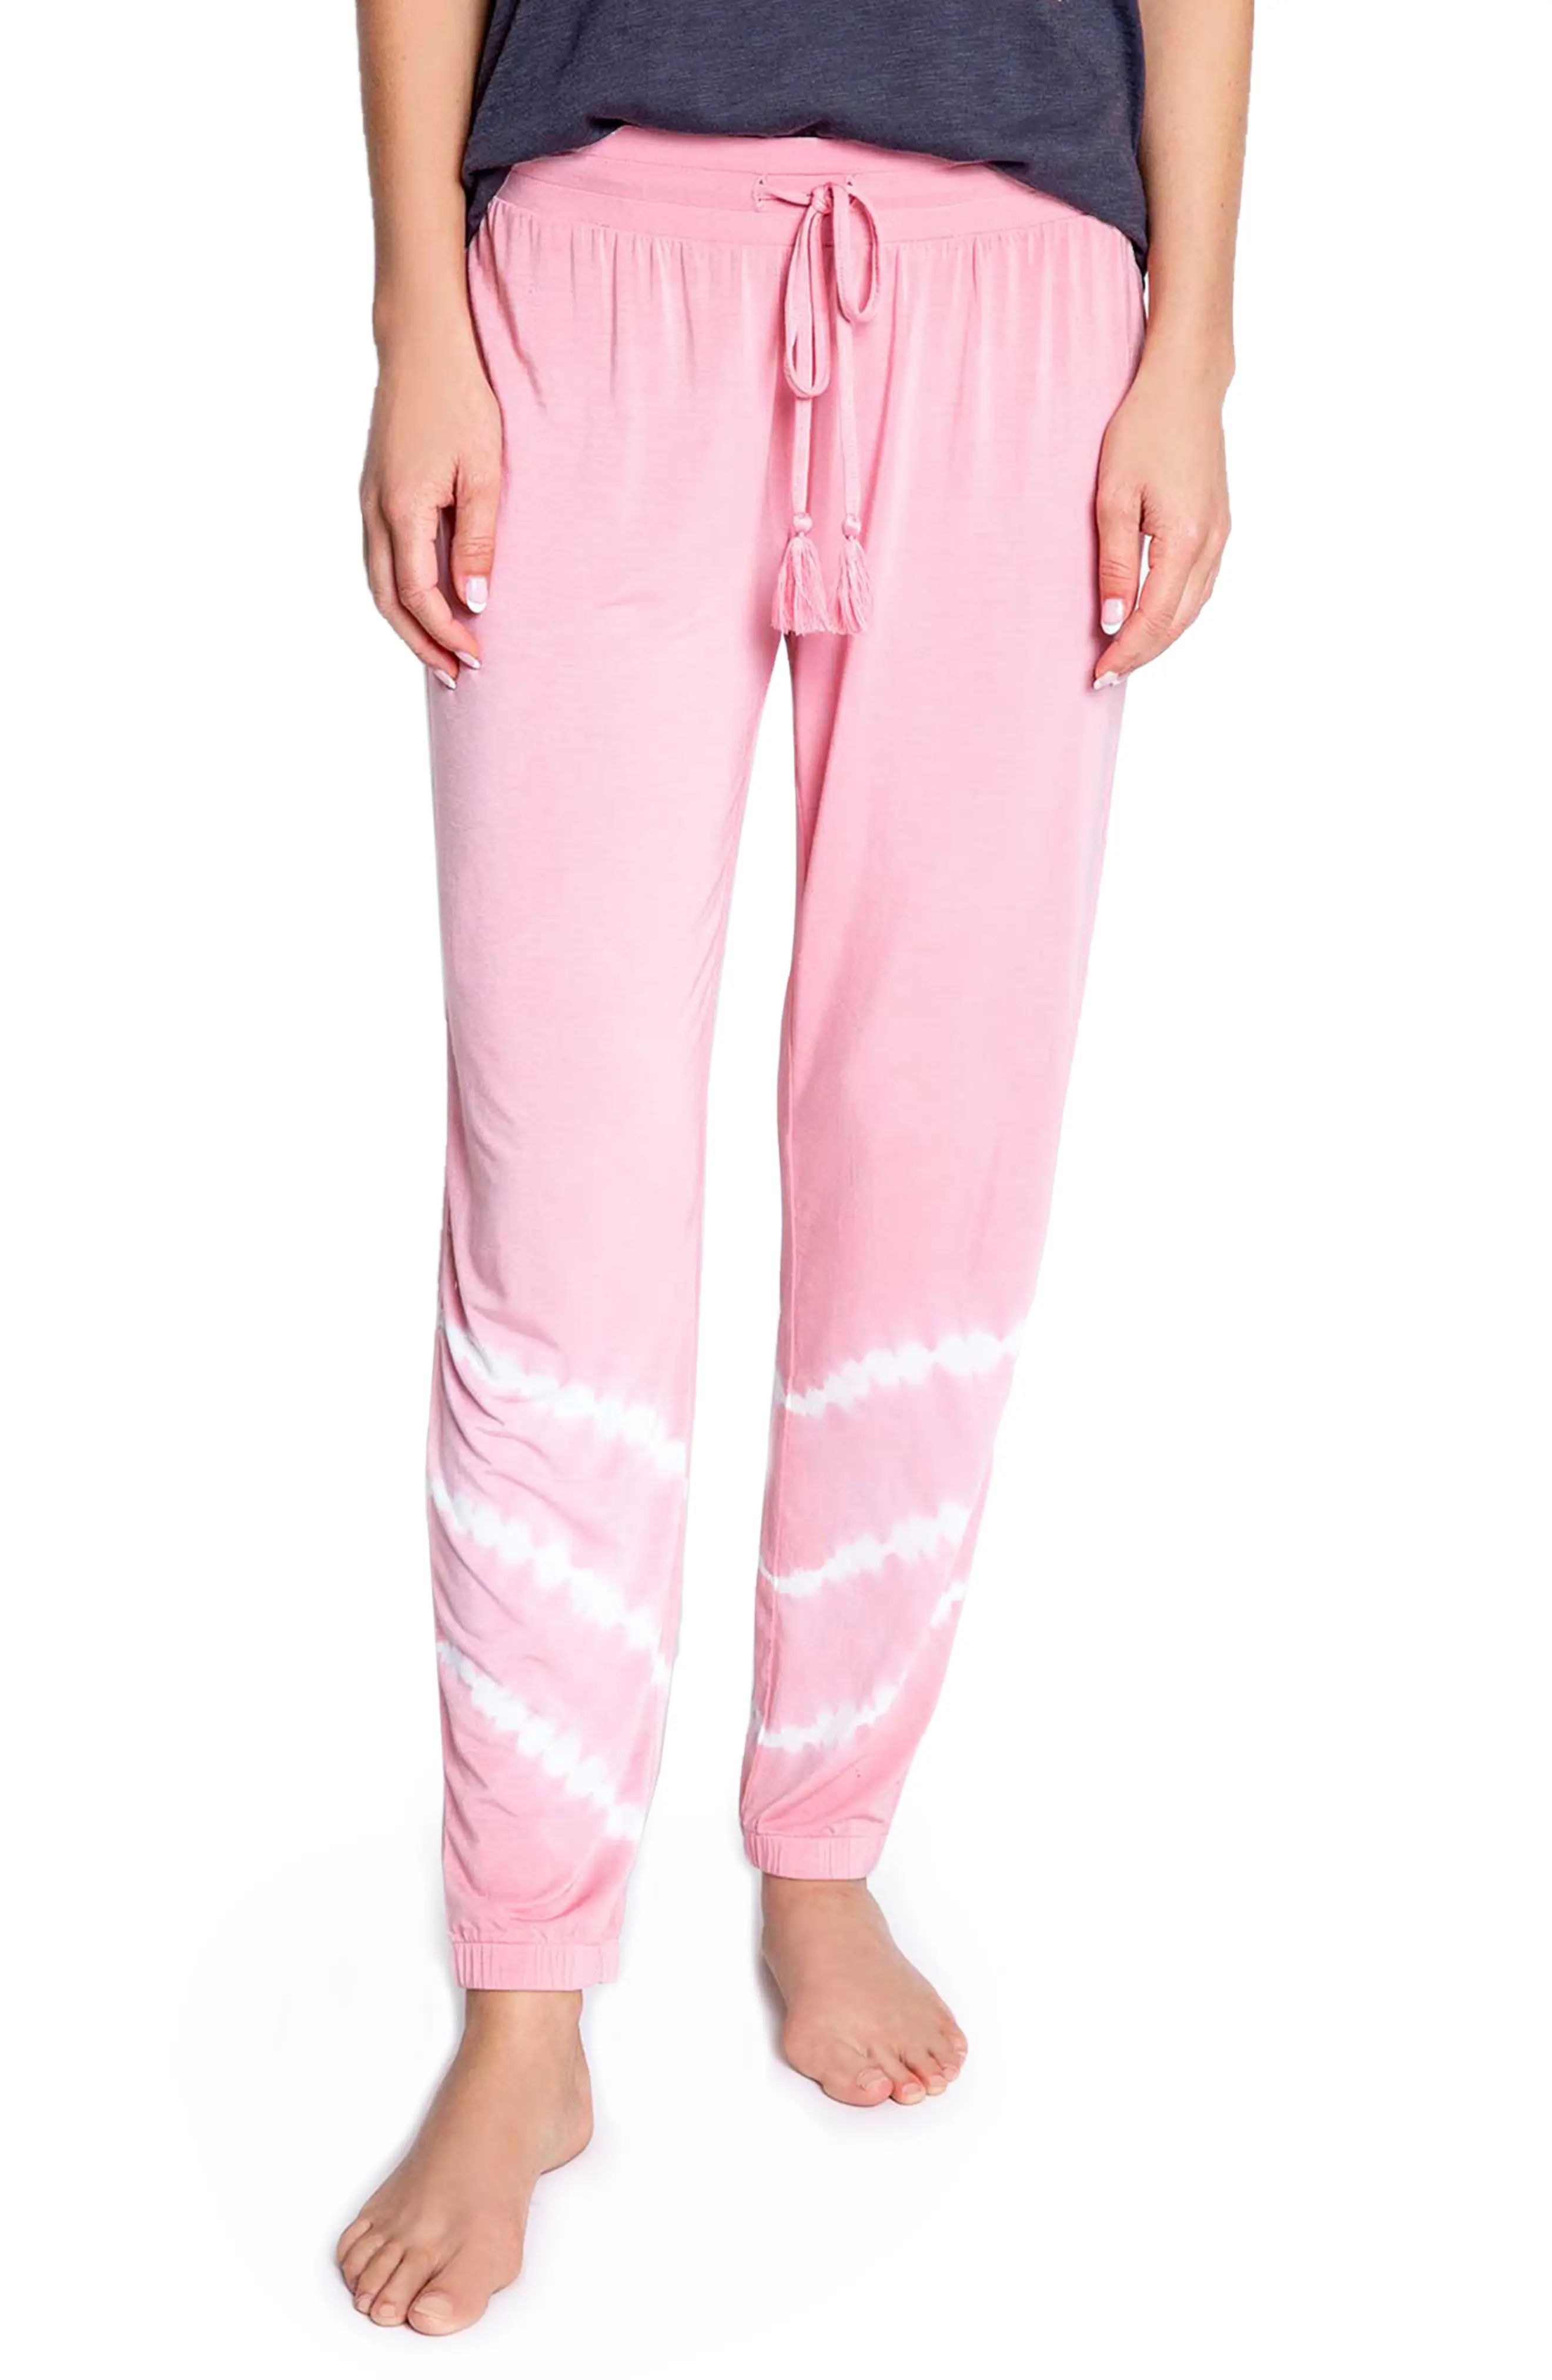 Women's Pj Salvage Venice Vibes Tie Dye Lounge Pants, Size X-Small - Coral | Nordstrom